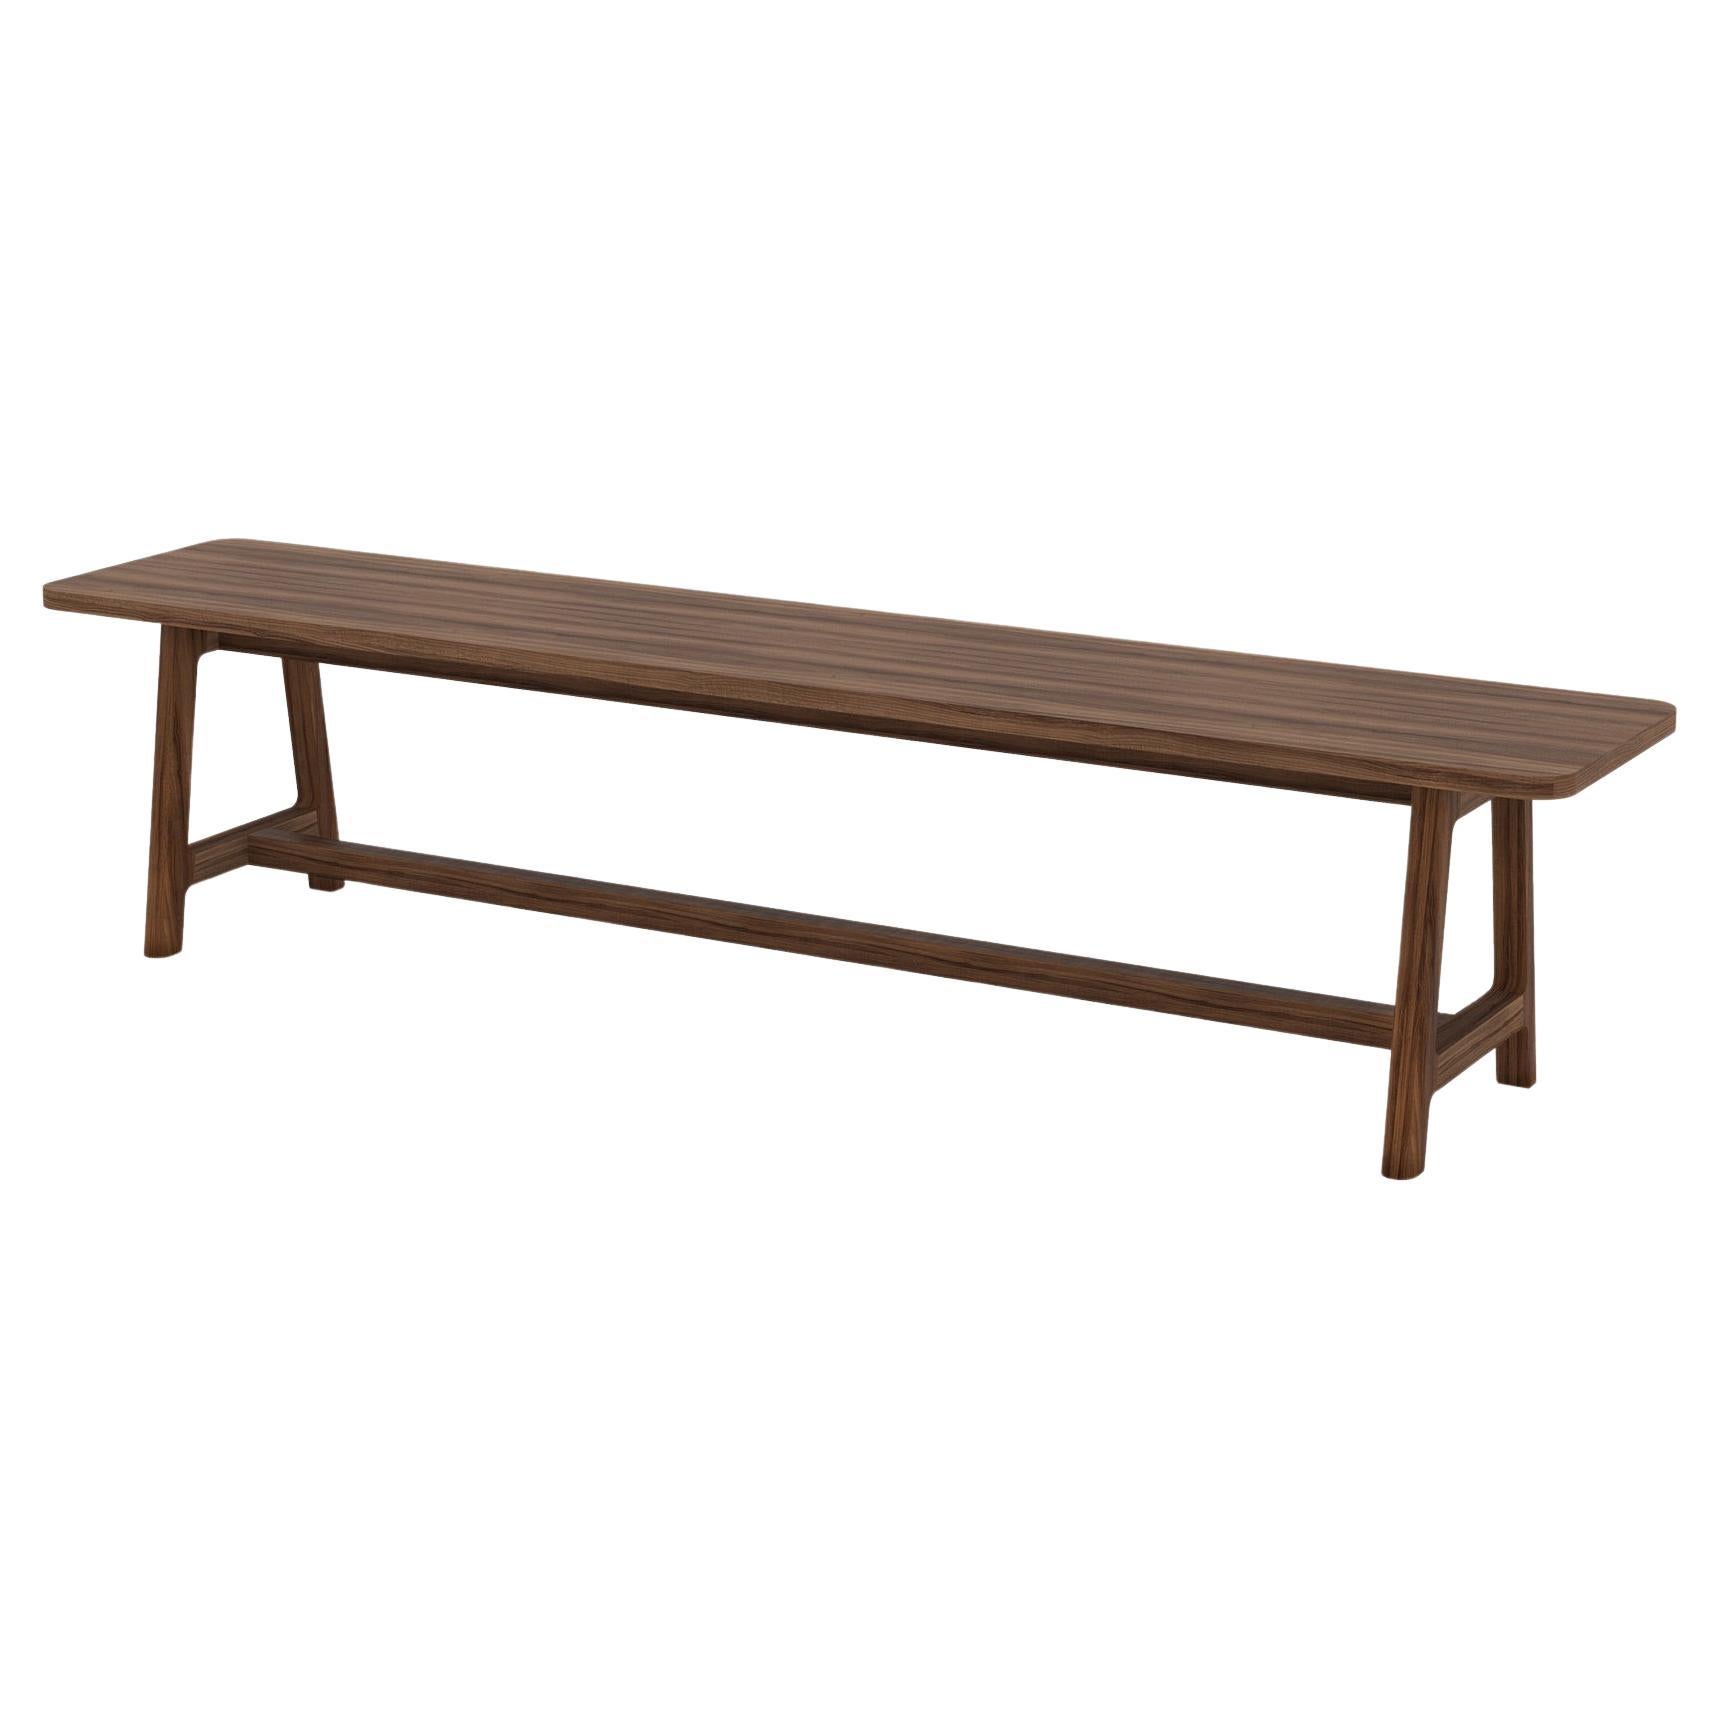 Minimalist Modern Bench in Walnut Wood Frame Collection For Sale